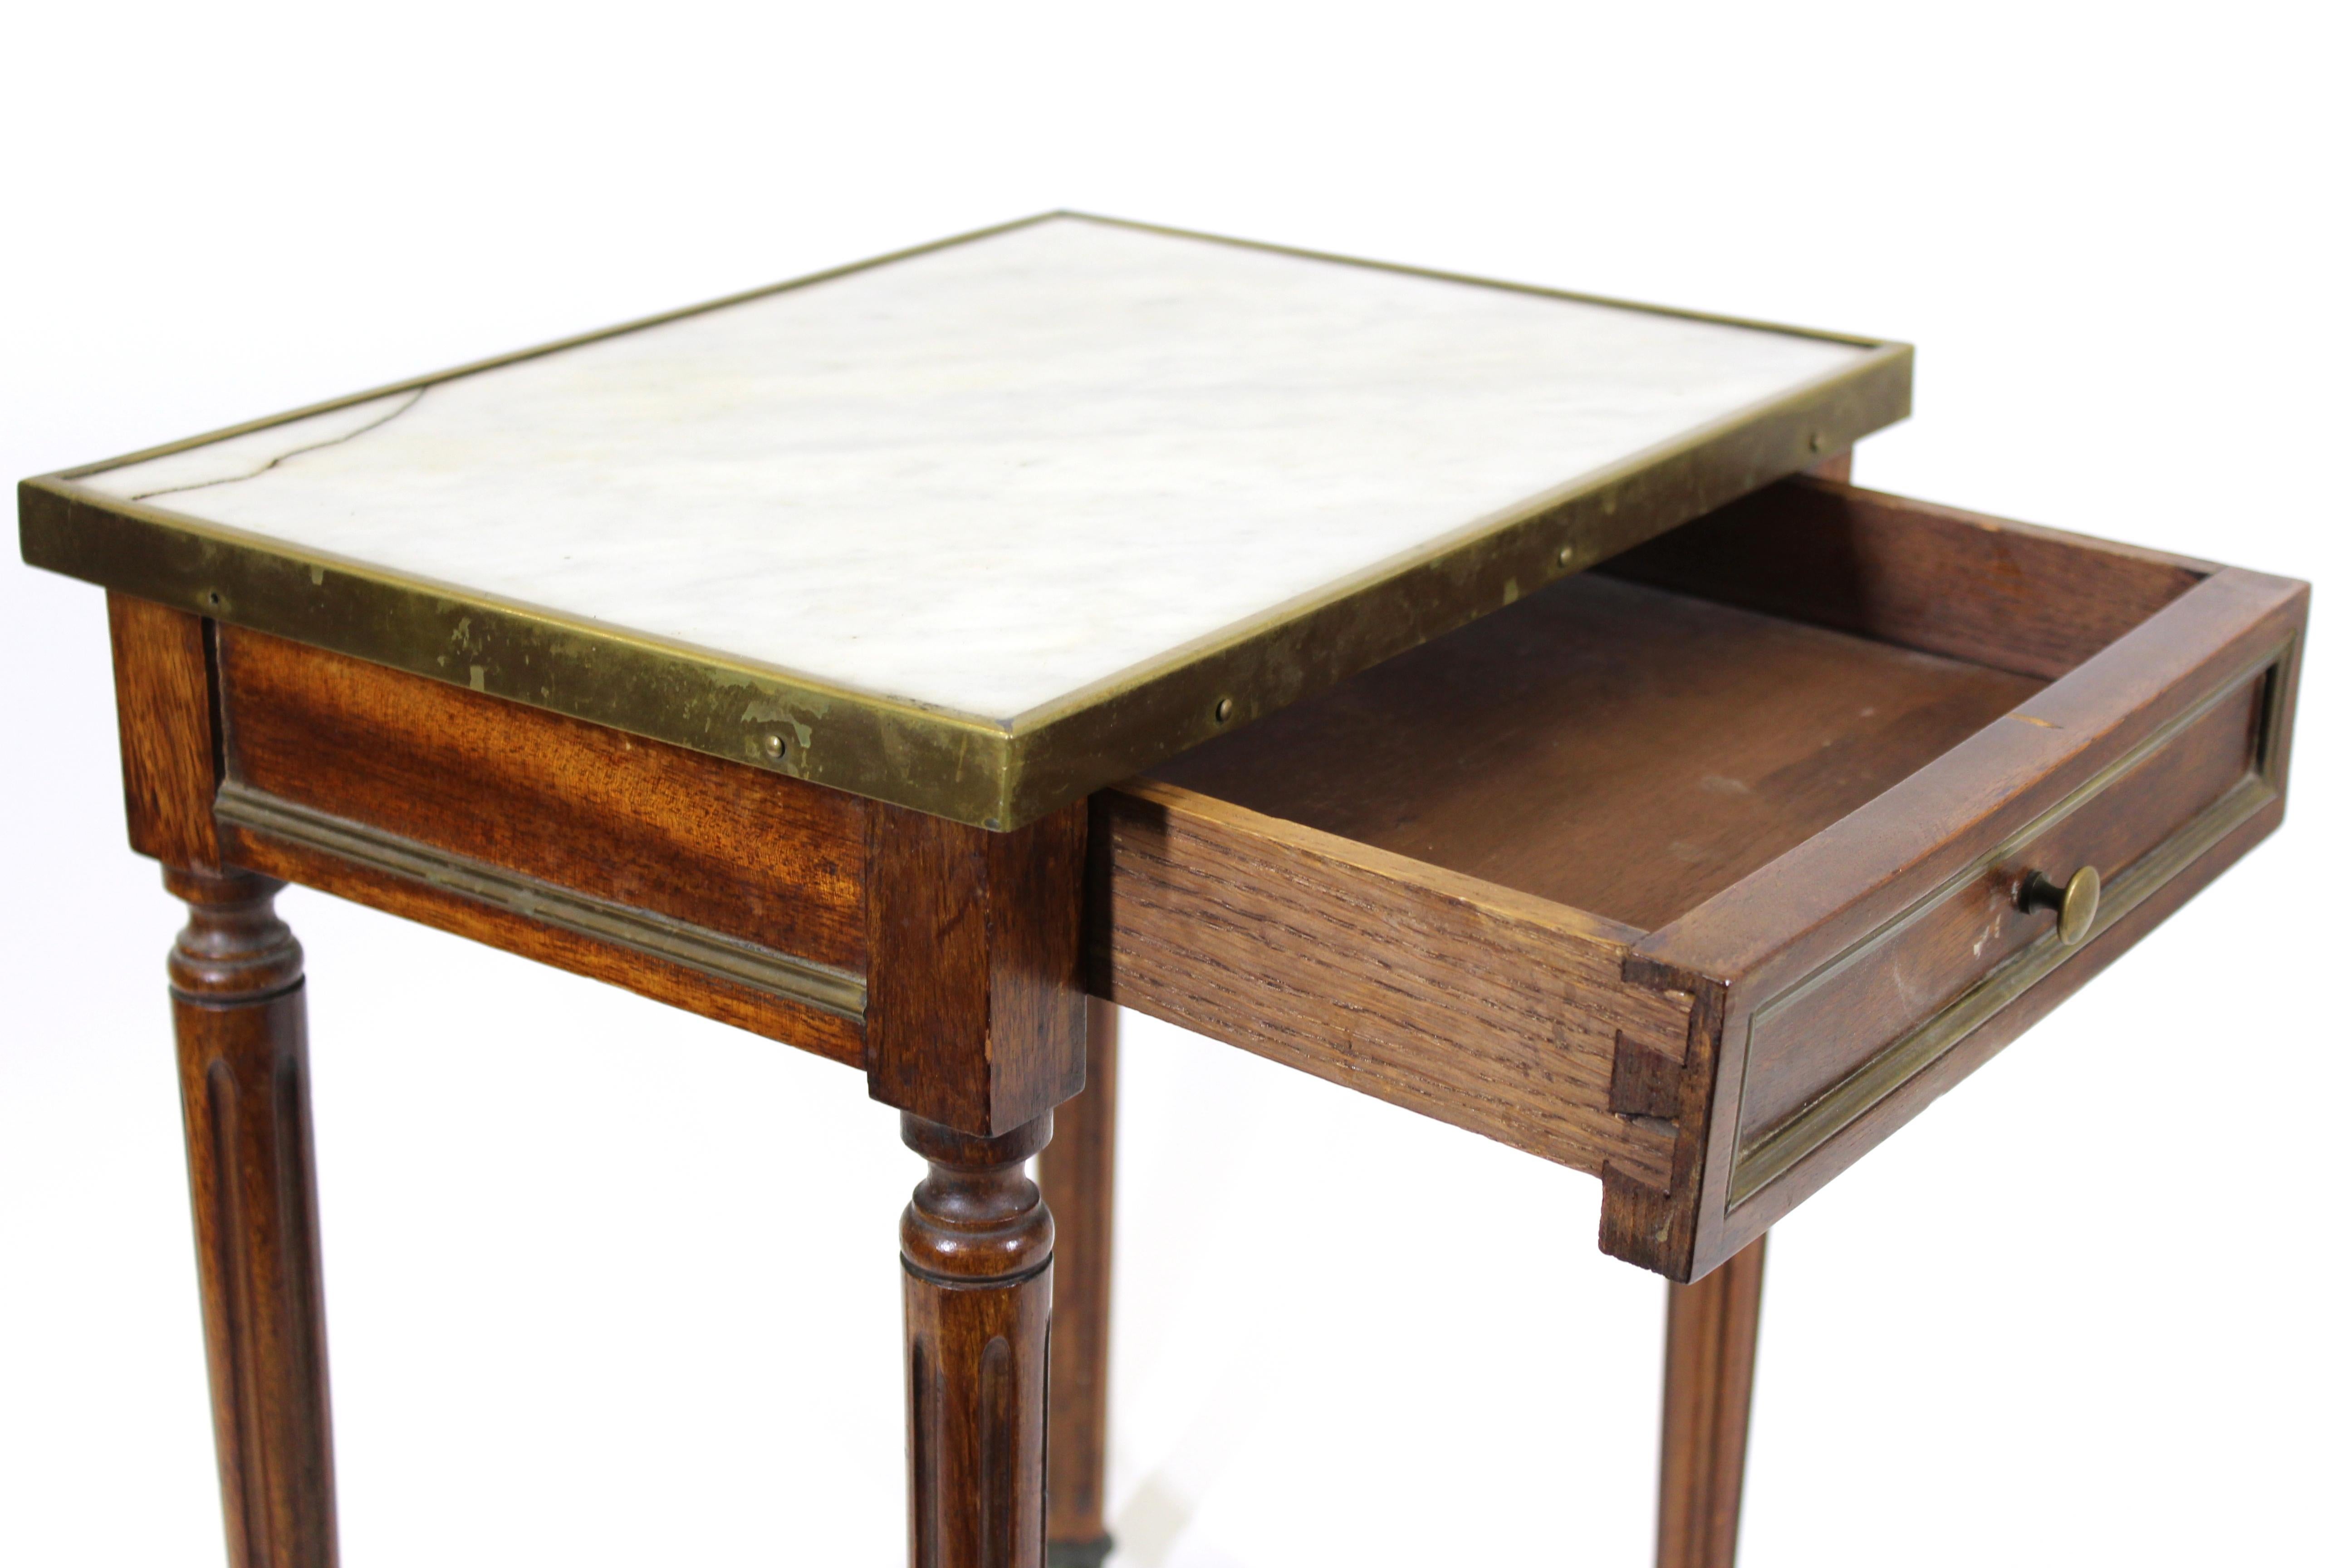 European Continental Diminutive Marble Top Side Table with Drawer